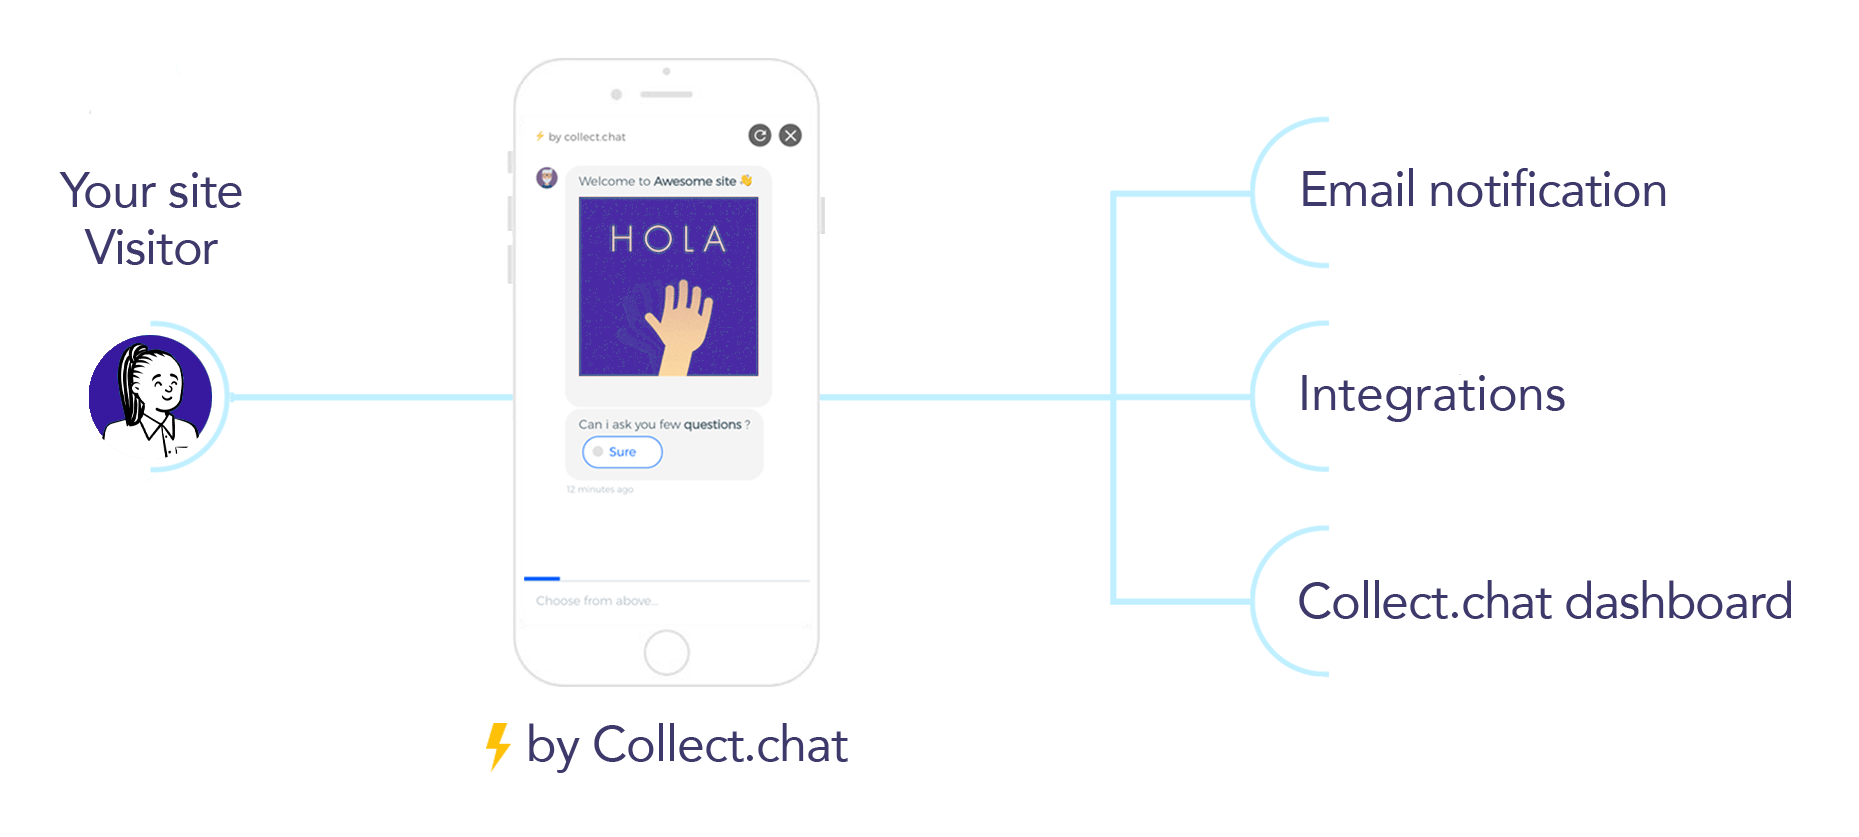 How Collect.chat works, You get an email alert (or a webhook) when a visitor completes the flow